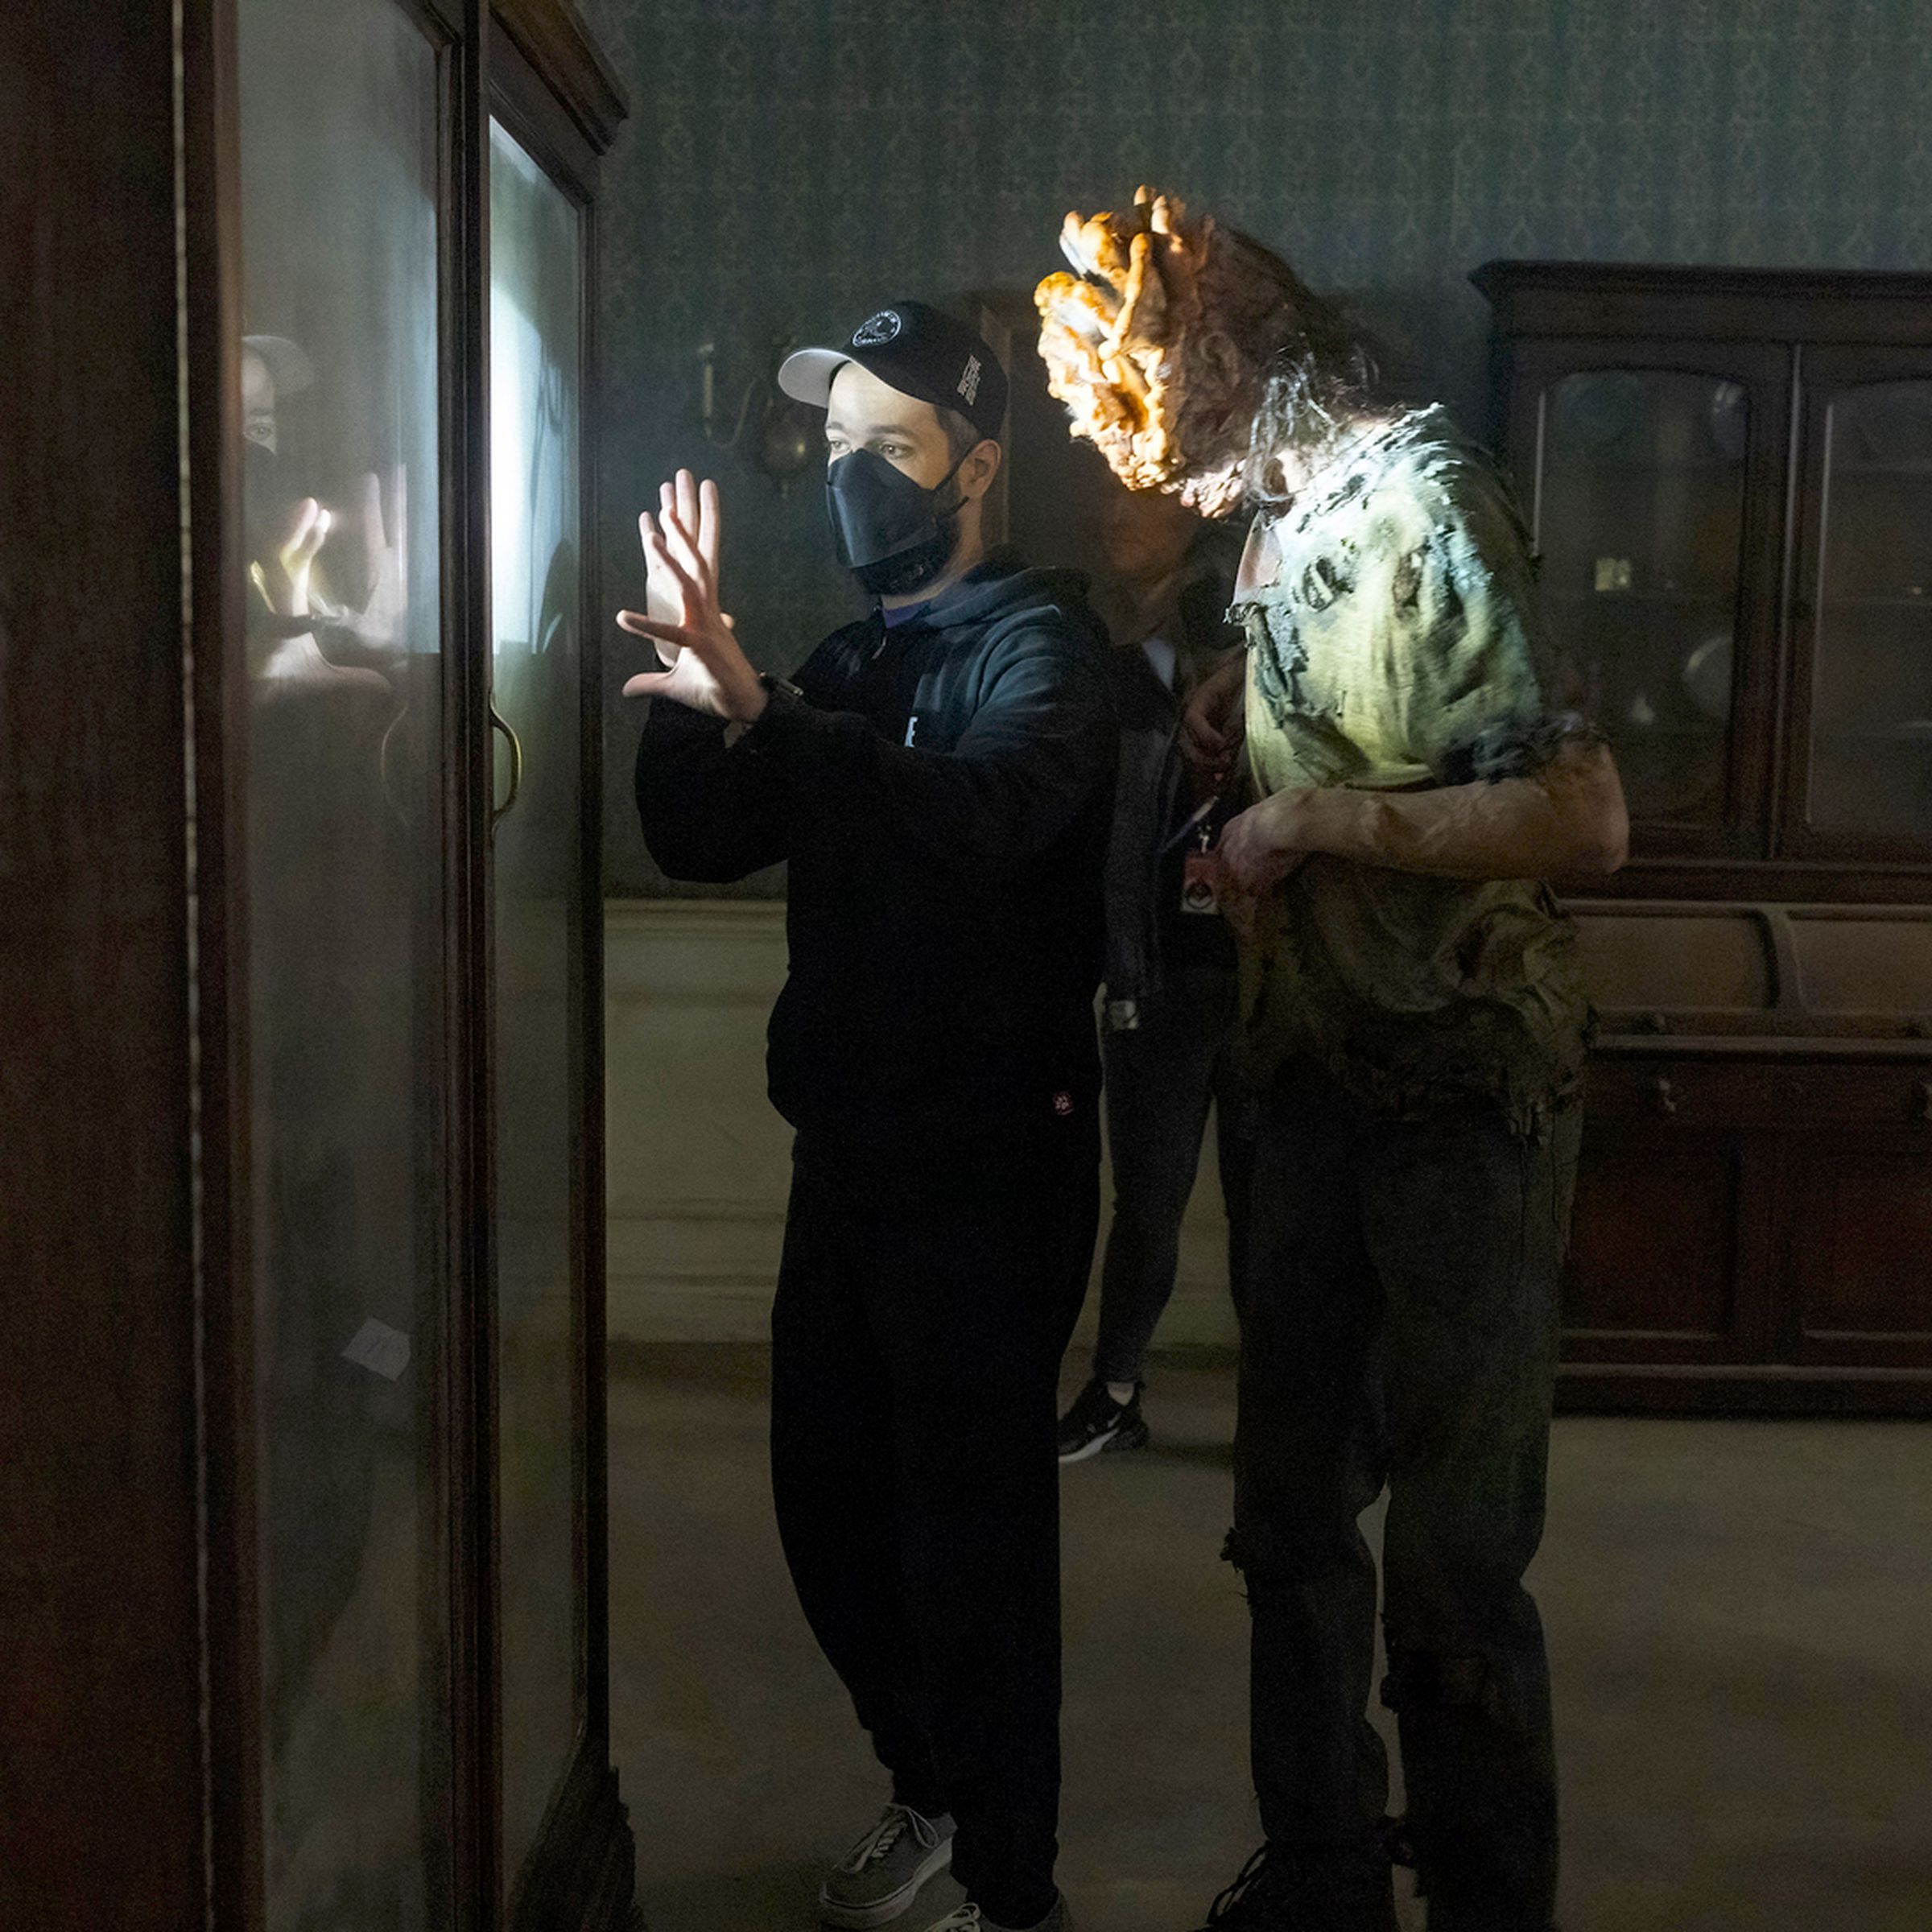 Two men on a film set standing in front of a display case. Closest to the case is a man in a black hoodie, jeans, a baseball cap, and a black mask as he gestures towards something while giving the other man. The second man, standing just behind the first is wearing a mottled pair of pants, a shirt, and a face full of prosthetics to make it look like his head has been colonized by an aggressive fungal growth.